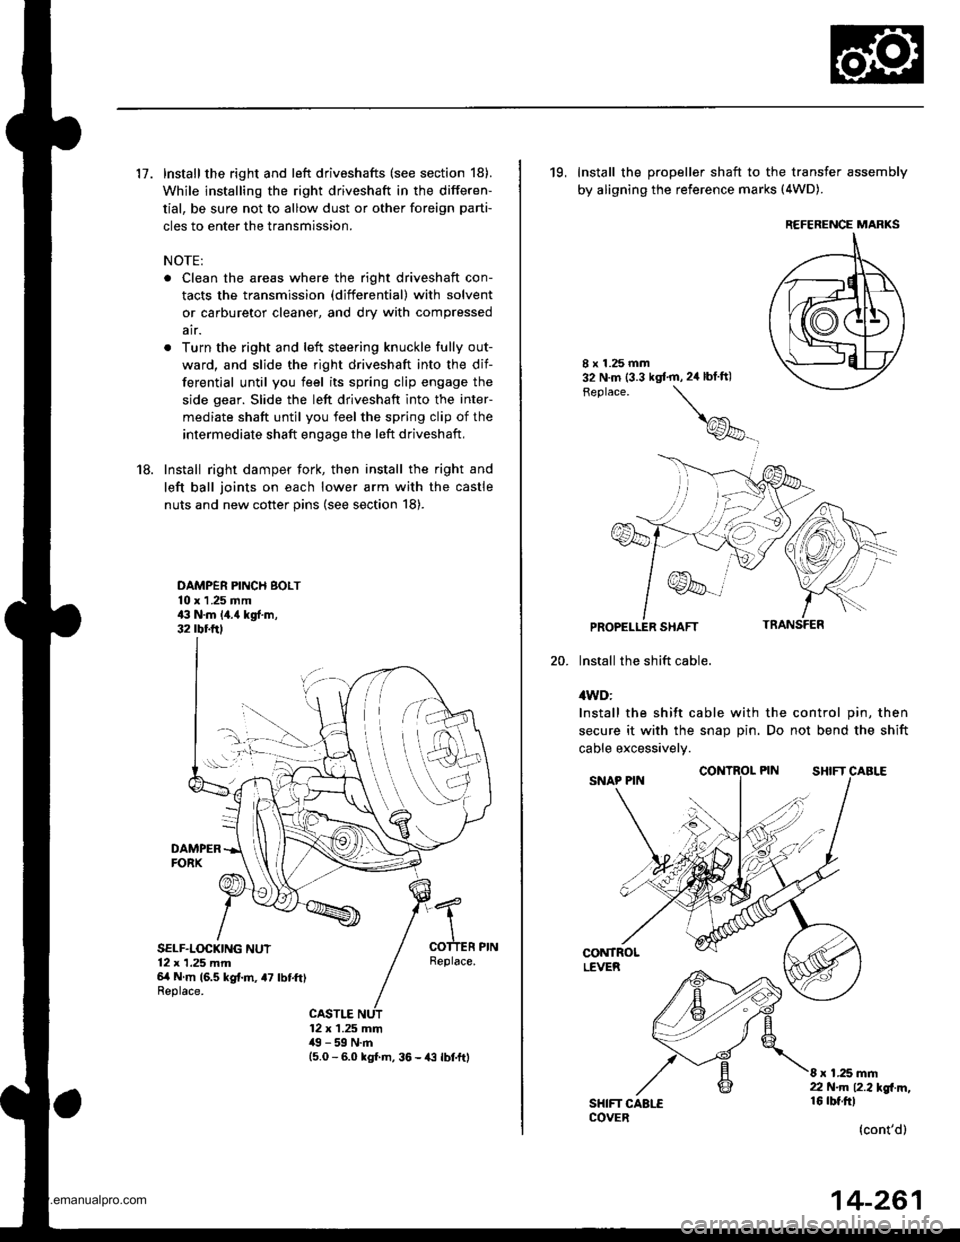 HONDA CR-V 1997 RD1-RD3 / 1.G User Guide 
17. Install the right and left driveshafts (see section 18).
While installing the right driveshaft in the differen-
tial, be sure not to allow dust or other foreign parti-
cles to enter the transmiss